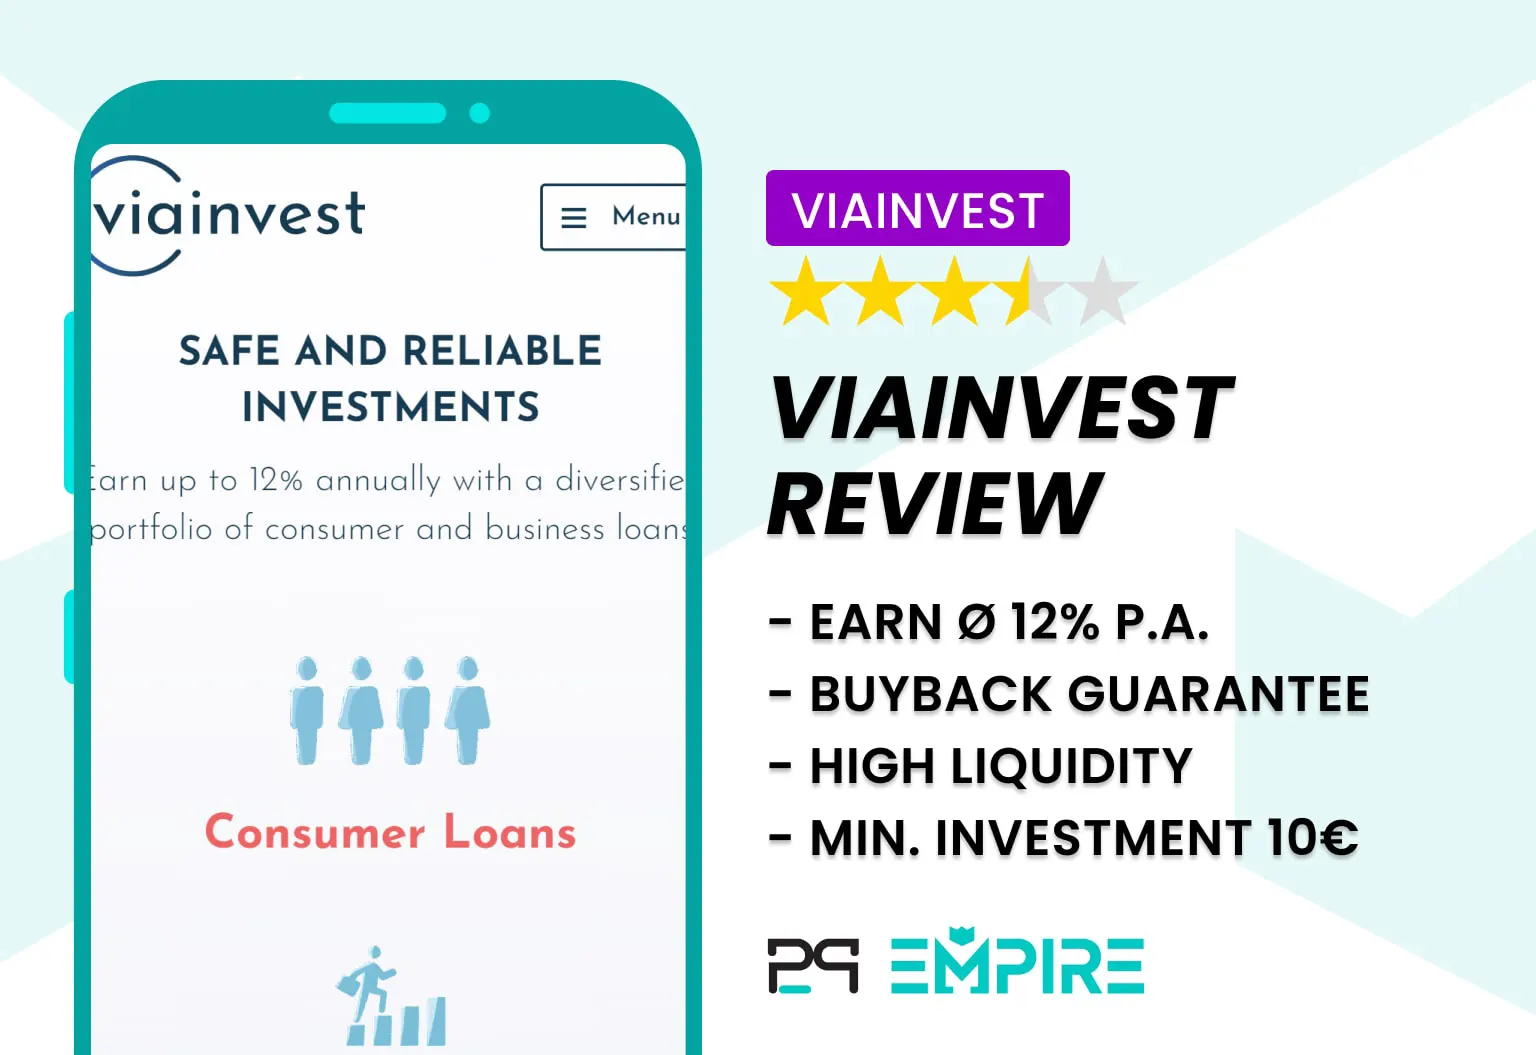 viainvest review